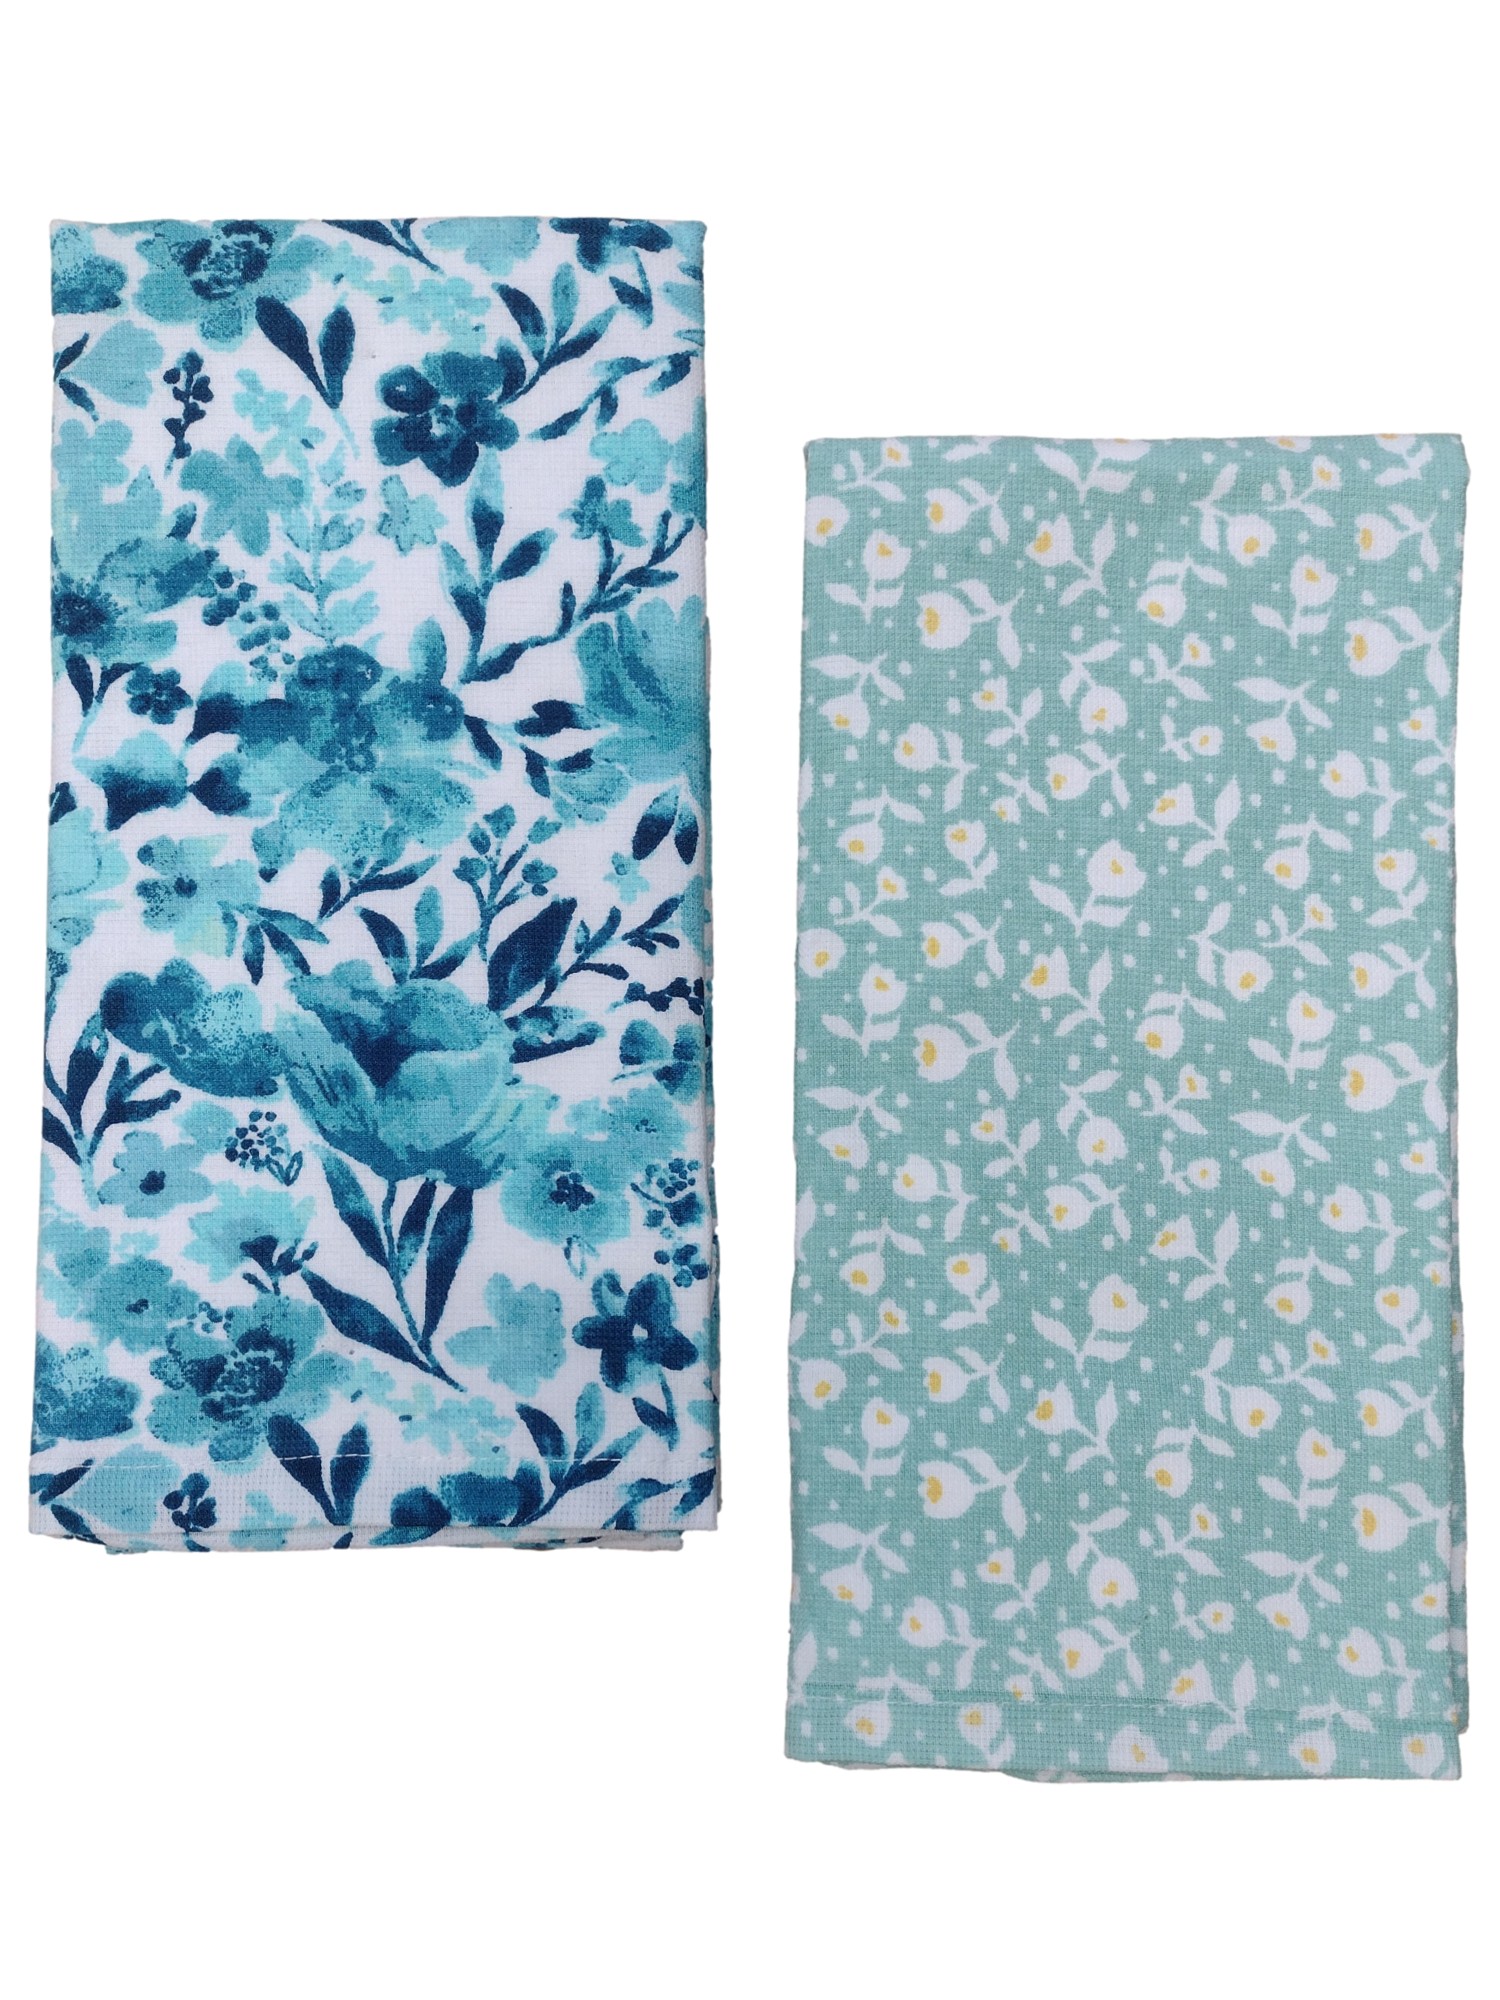 The Pioneer Woman Pioneer Woman Painterly Floral Teal Kitchen Towel Set, 2 Dish Towels